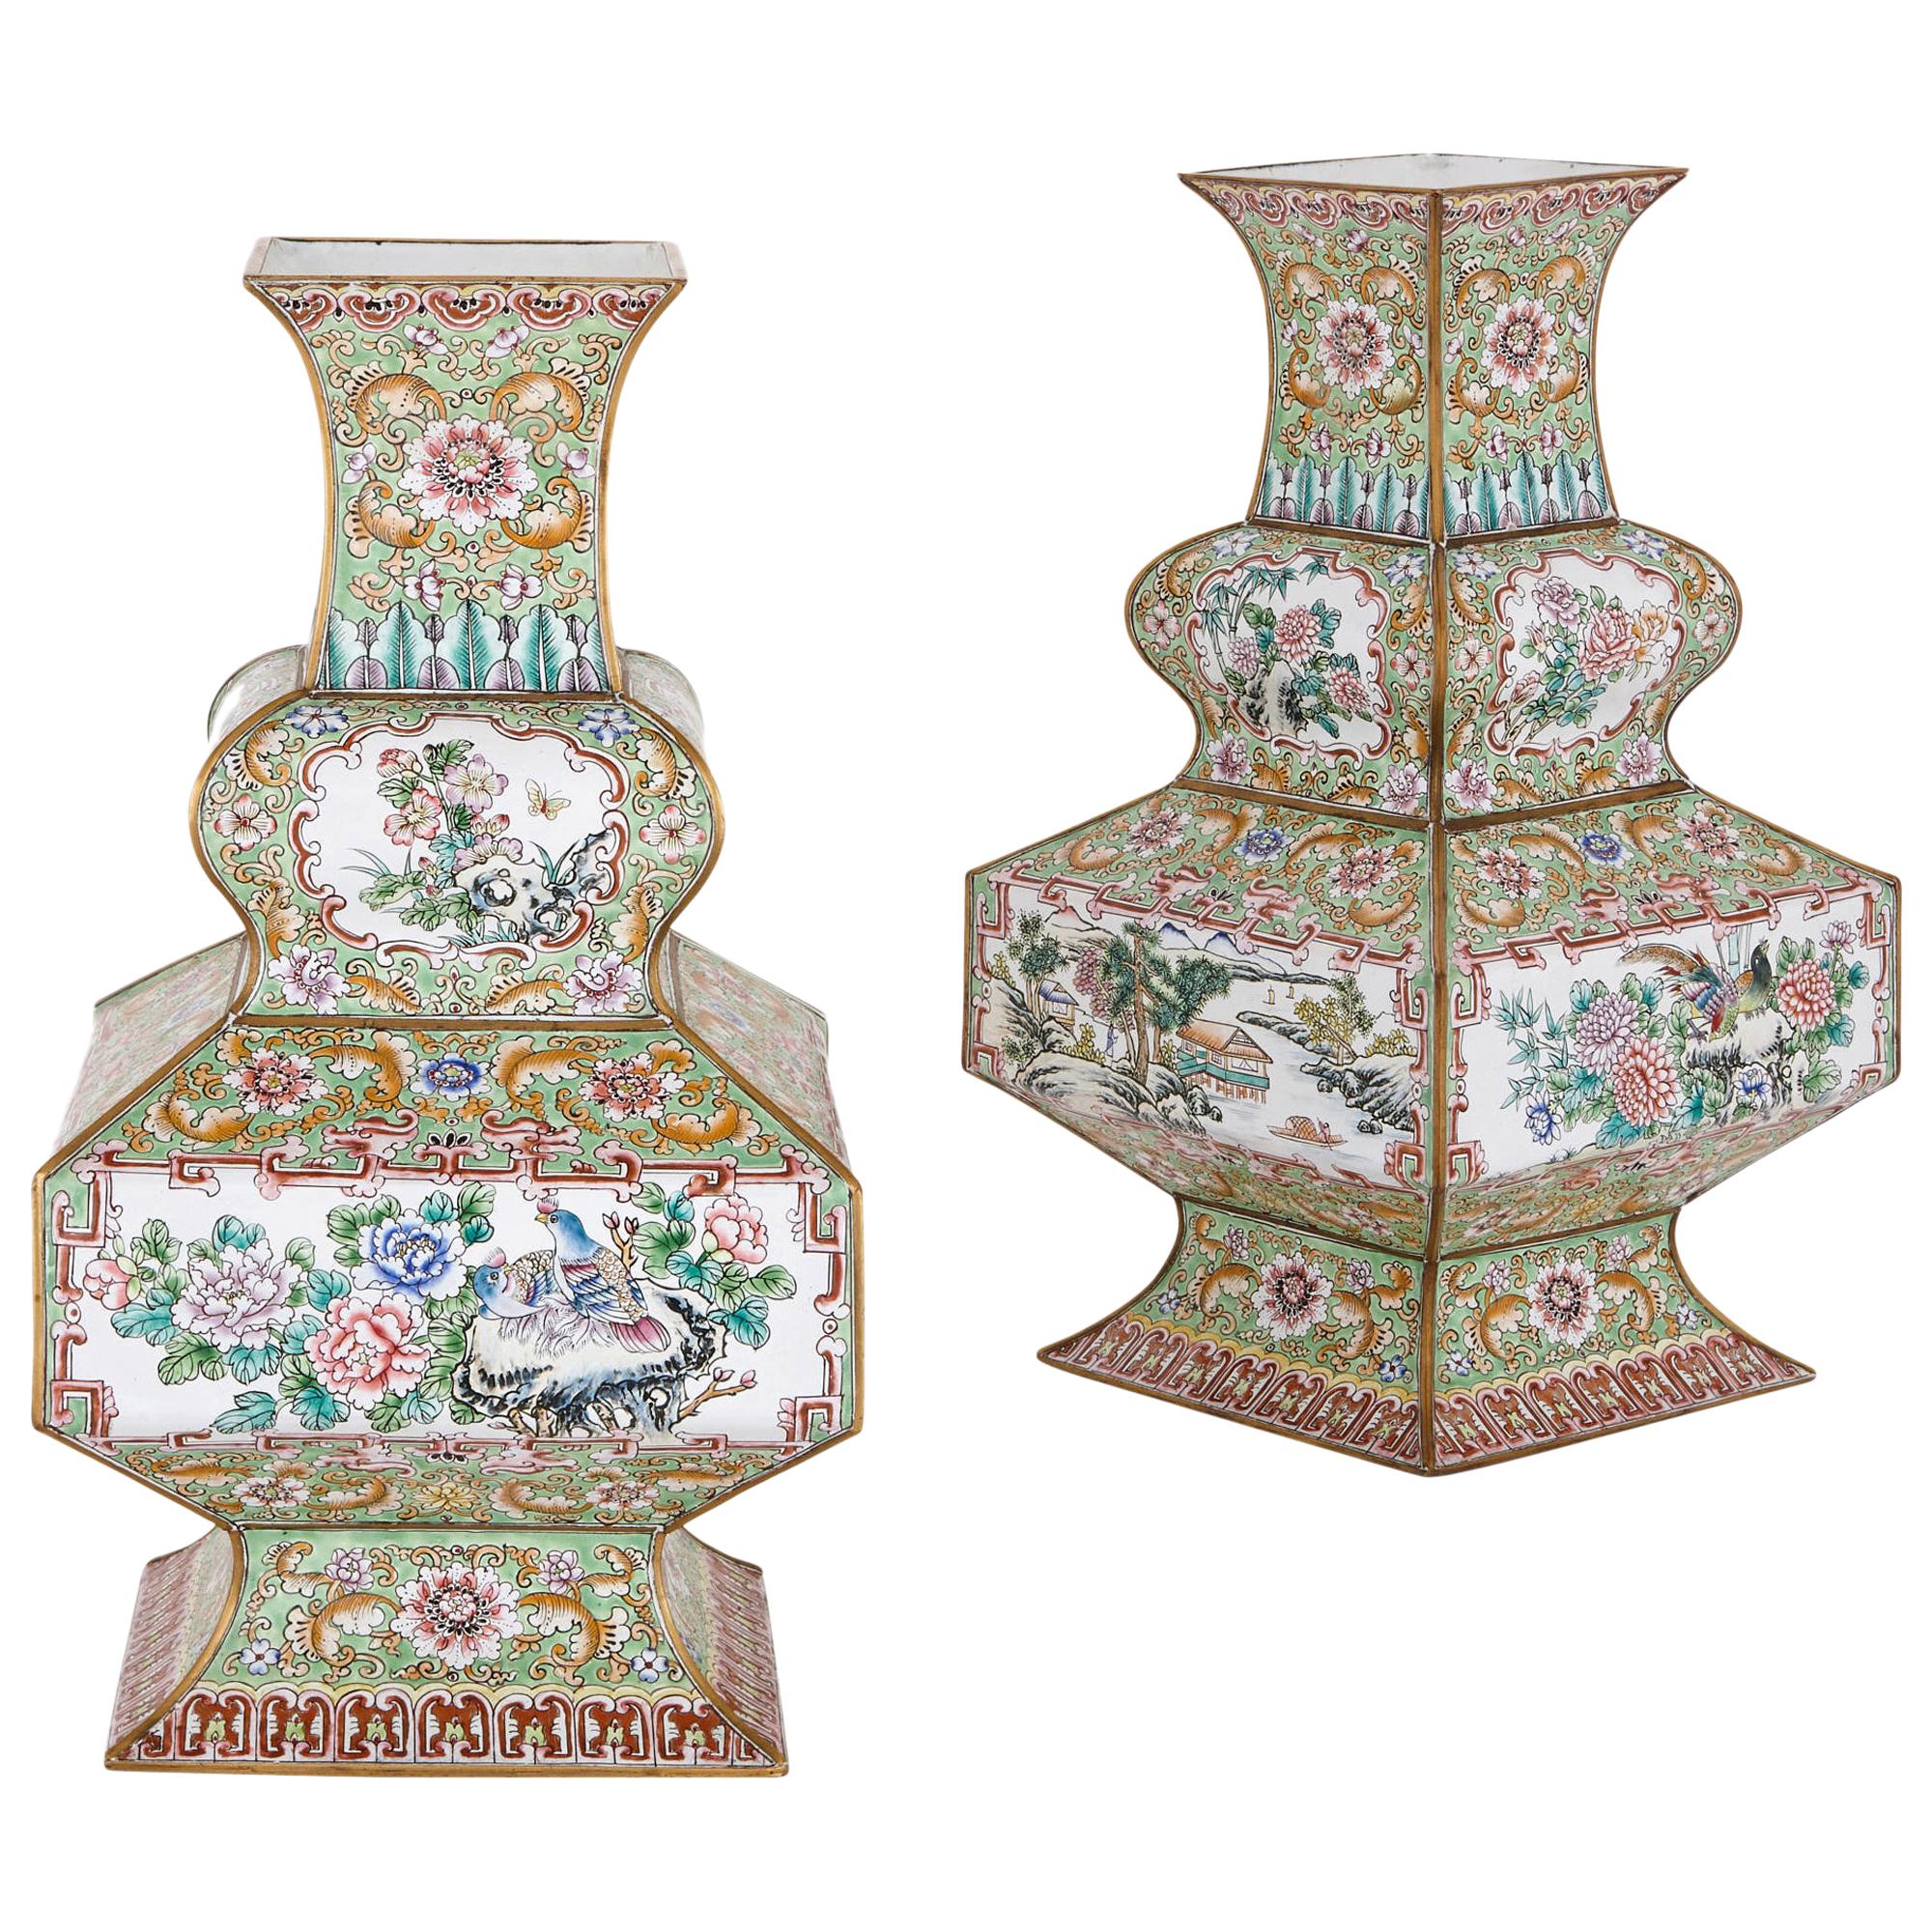 Two Chinese Green Cloisonné Enamel Vases